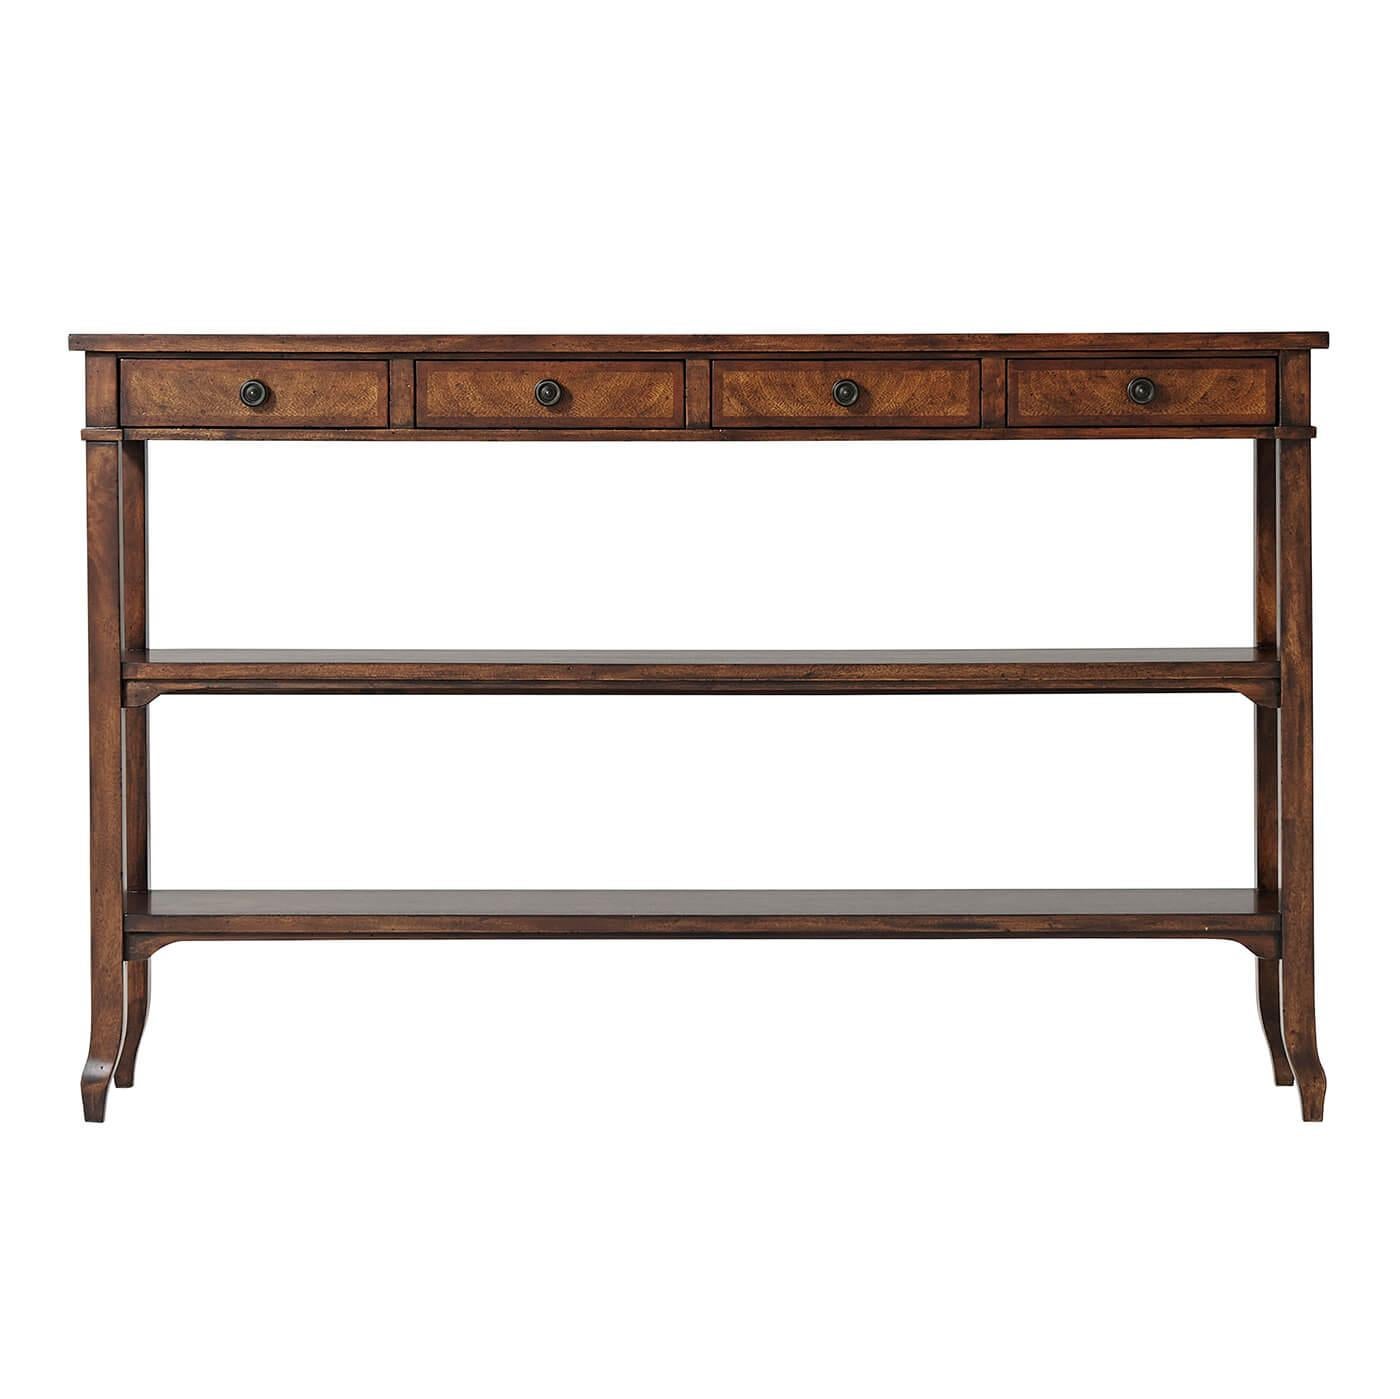 A neoclassic style mahogany French Provincial Console table, the rectangular crossbanded top above four frieze drawers, on gently splayed legs joined by two under tiers. 

Dimensions: 54